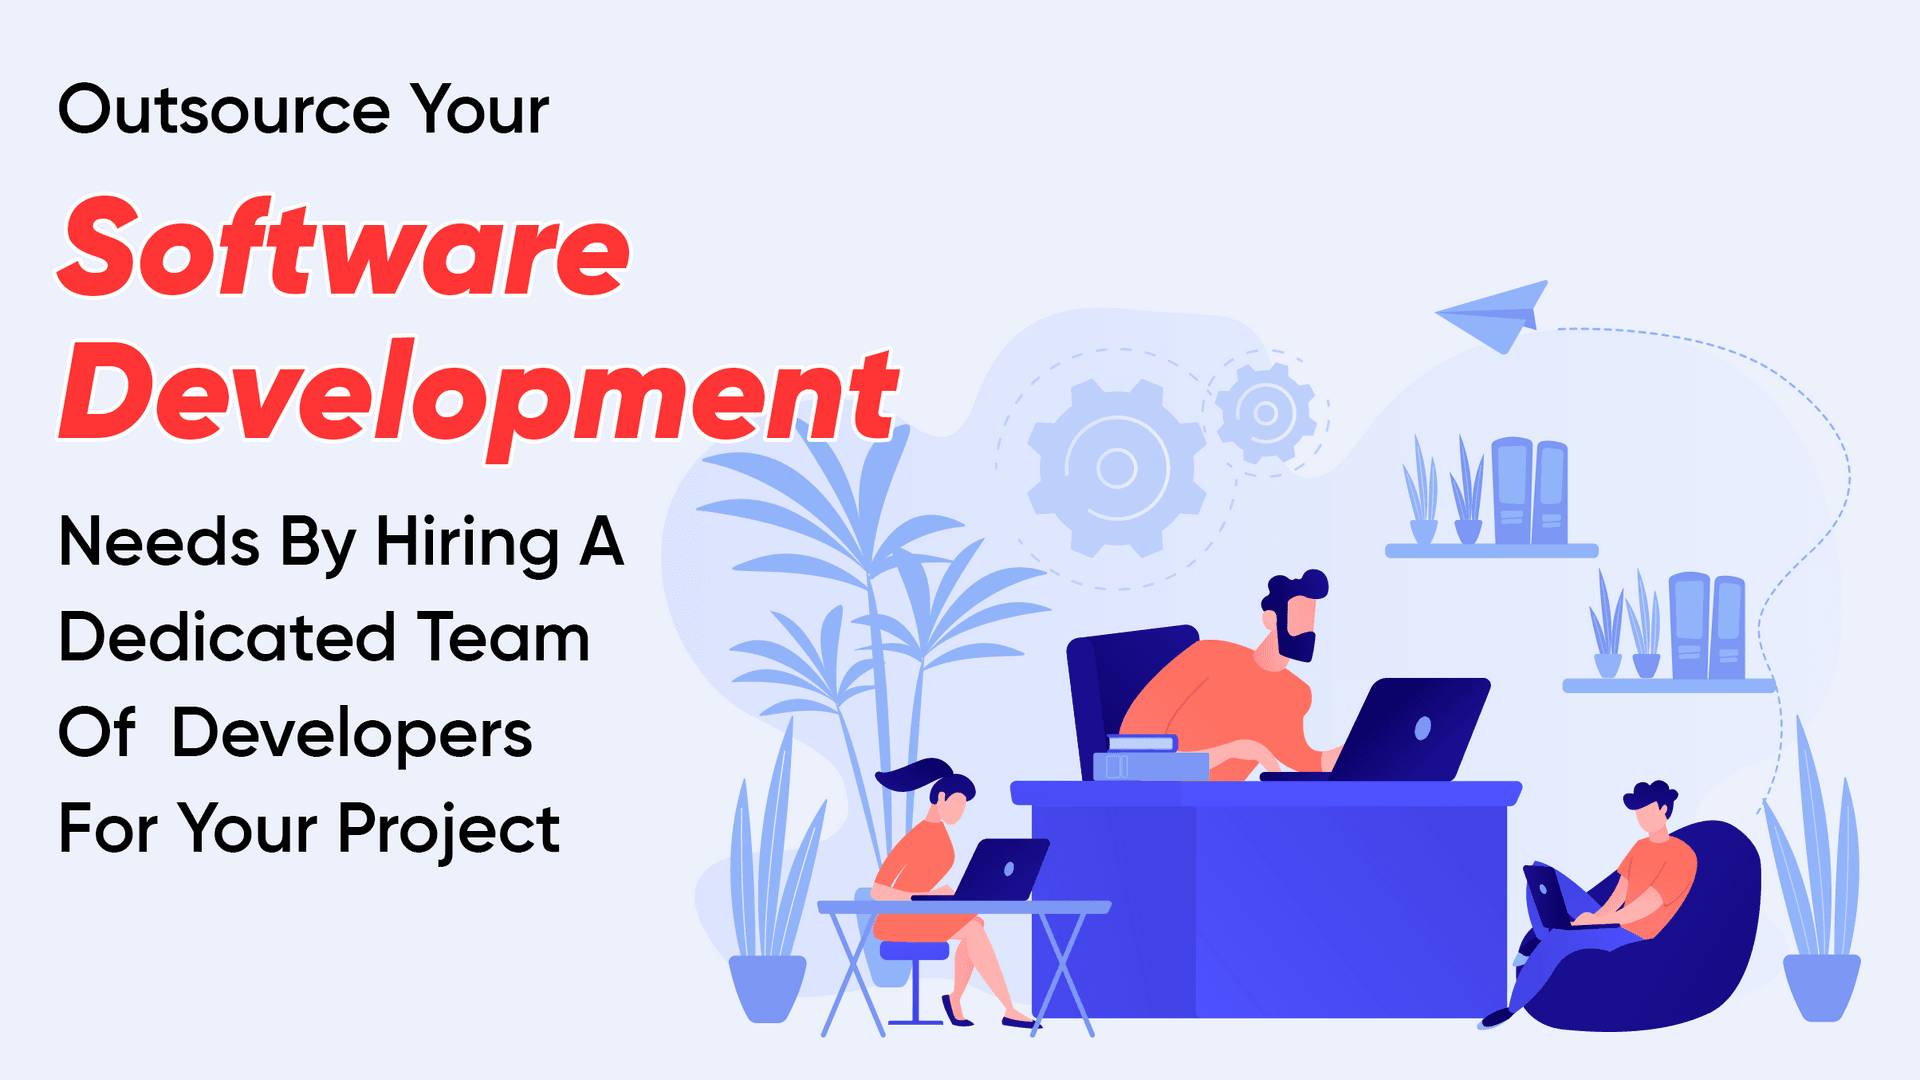 Outsource Your Software Development Needs By Hiring A Dedicated Team Of  Developers For Your Project